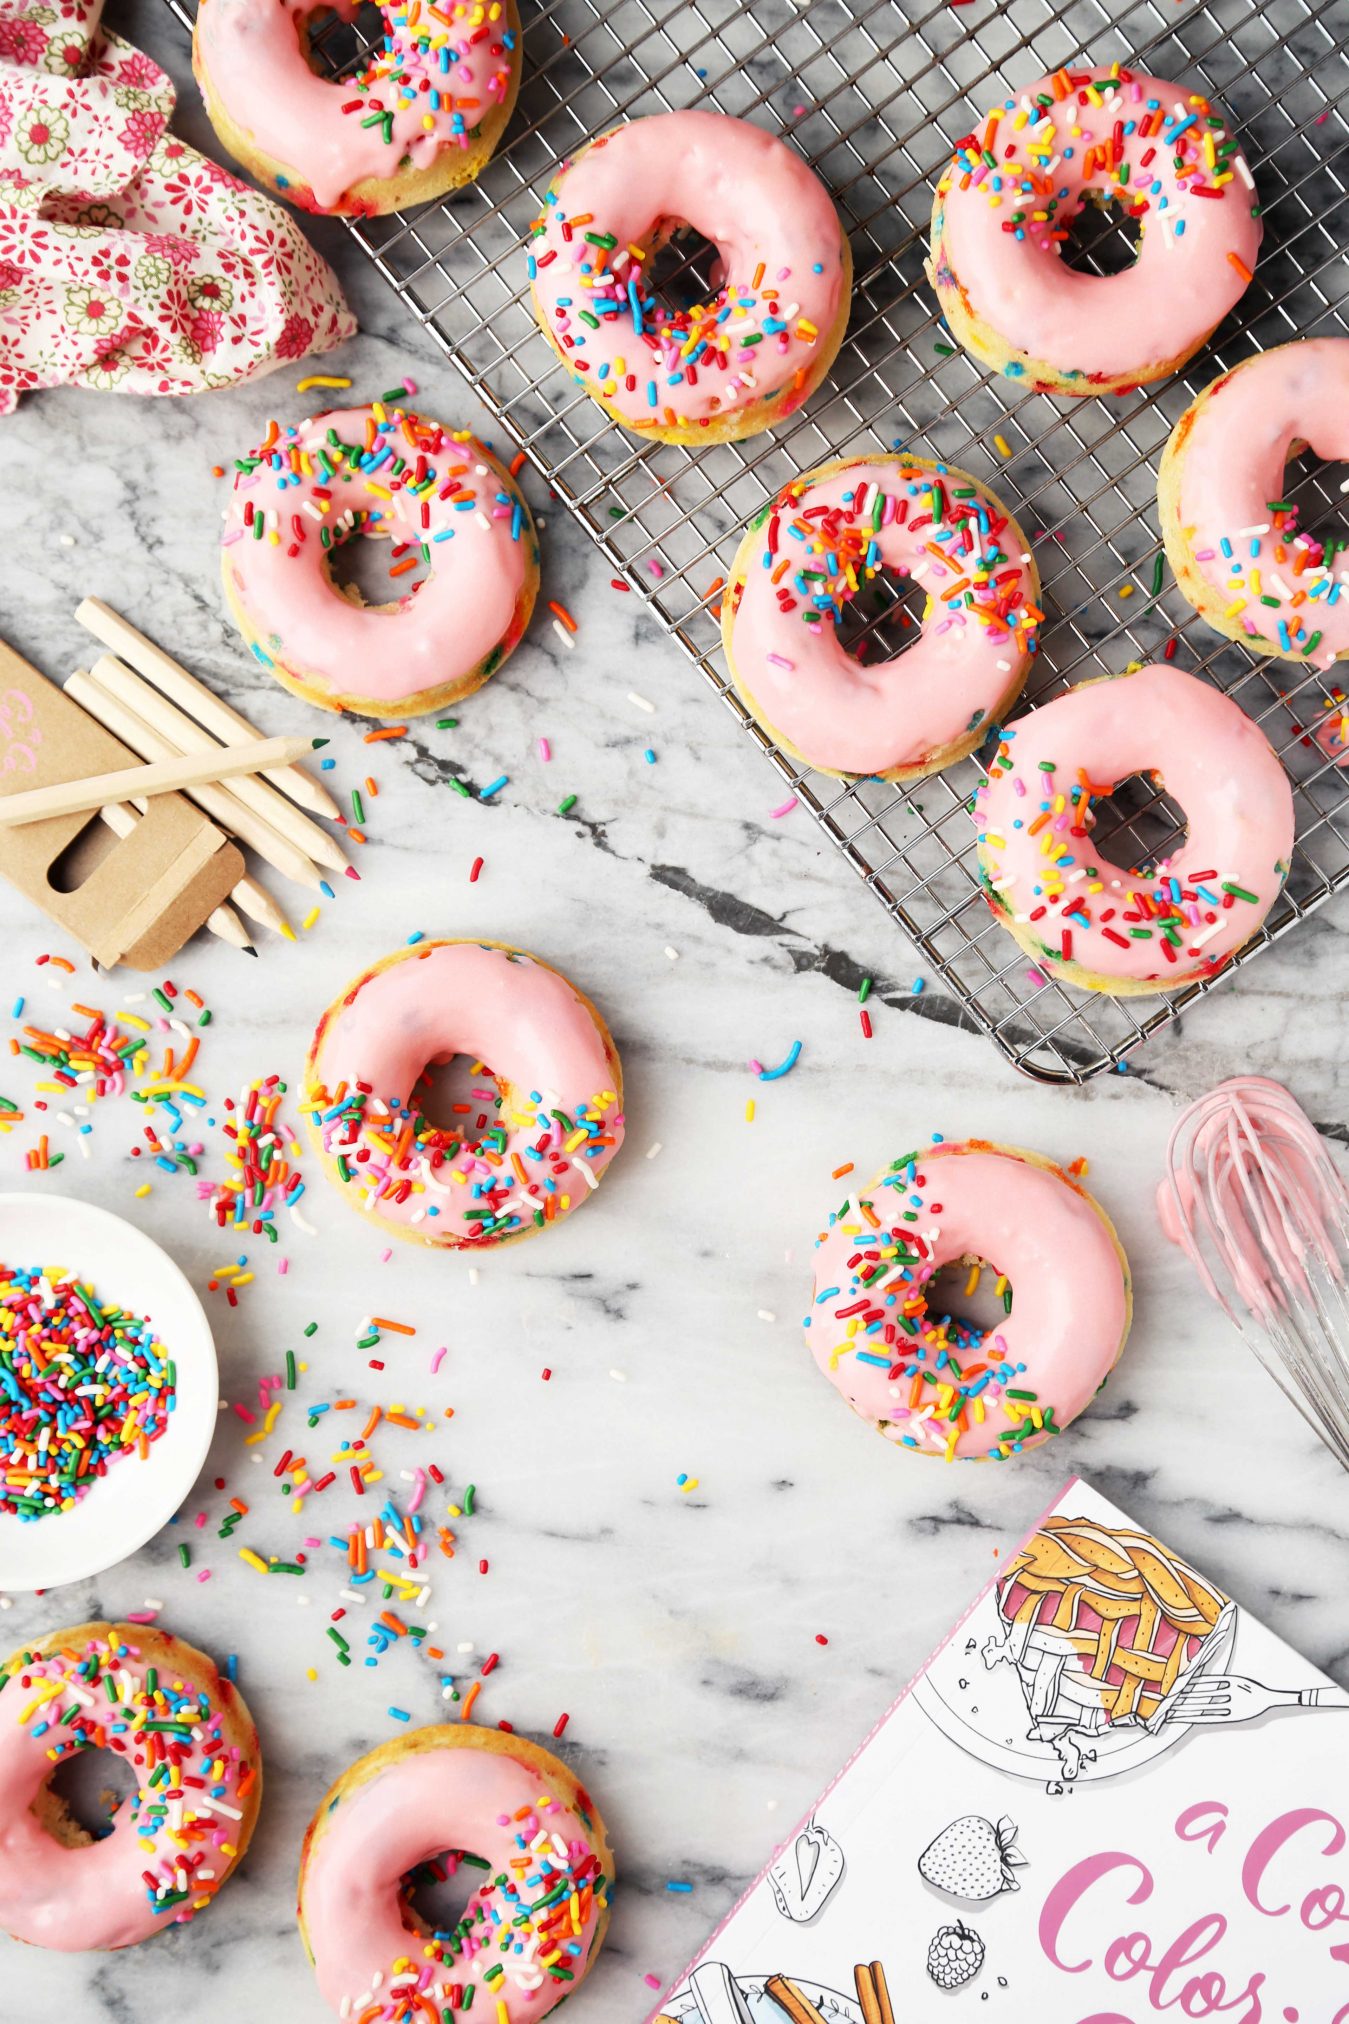 Baked Funfetti Doughnuts. Doughnuts are always a yes in my book, and since these are baked and also funfetti flavored, I think that makes them the ultimate weekend treat.